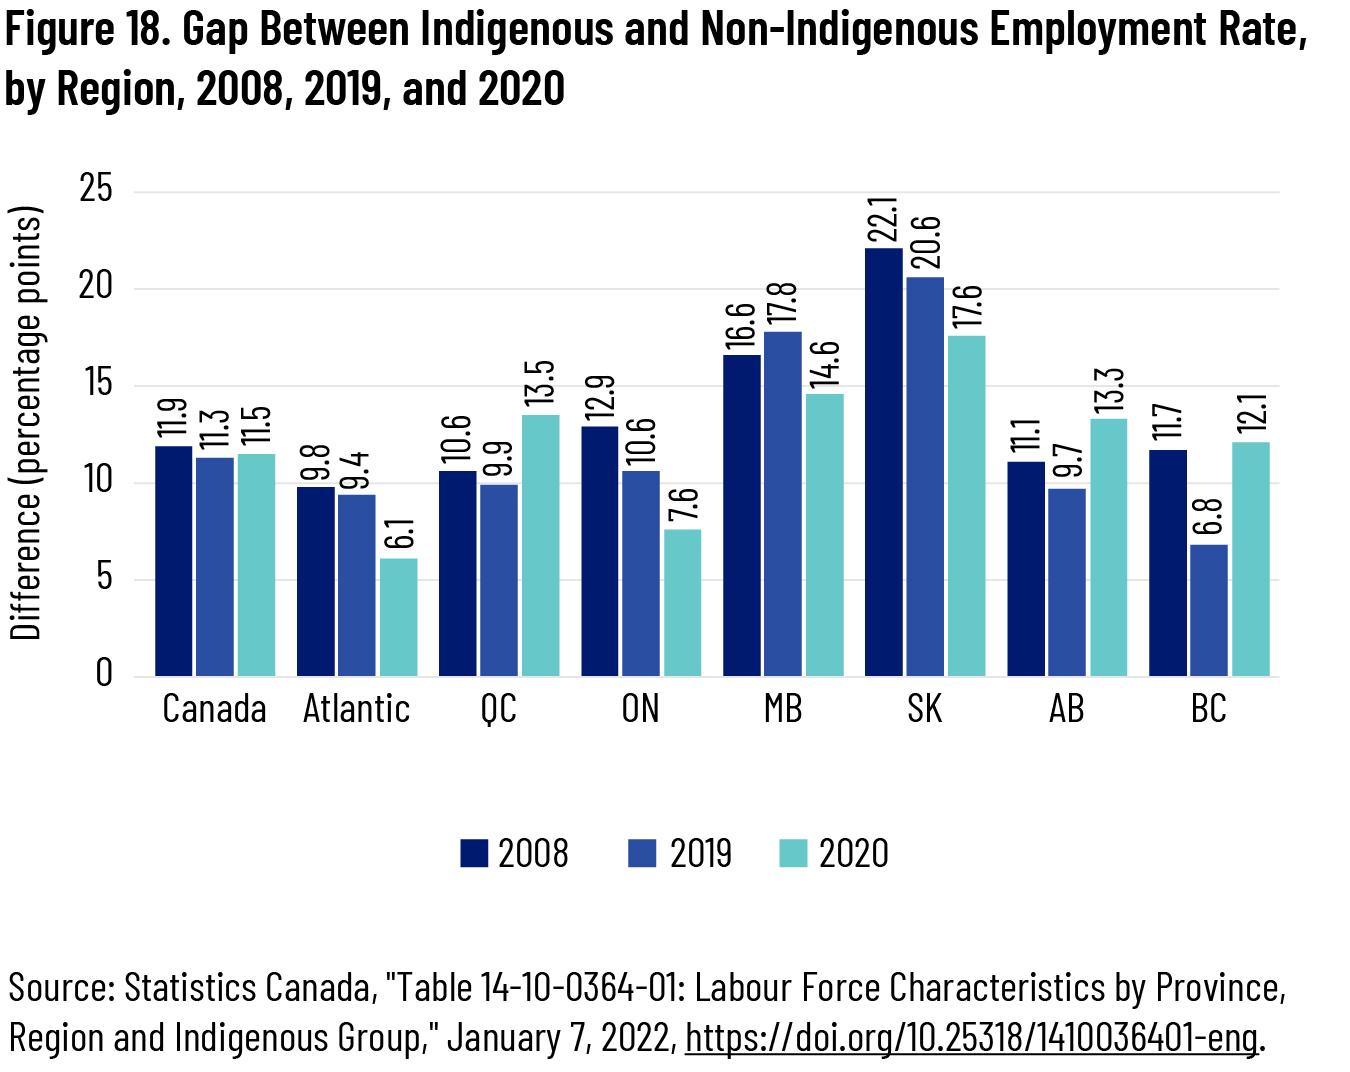 Figure 18. Gap Between Indigenous and Non-Indigenous Employment Rate, by Region, 2008, 2019, and 2020